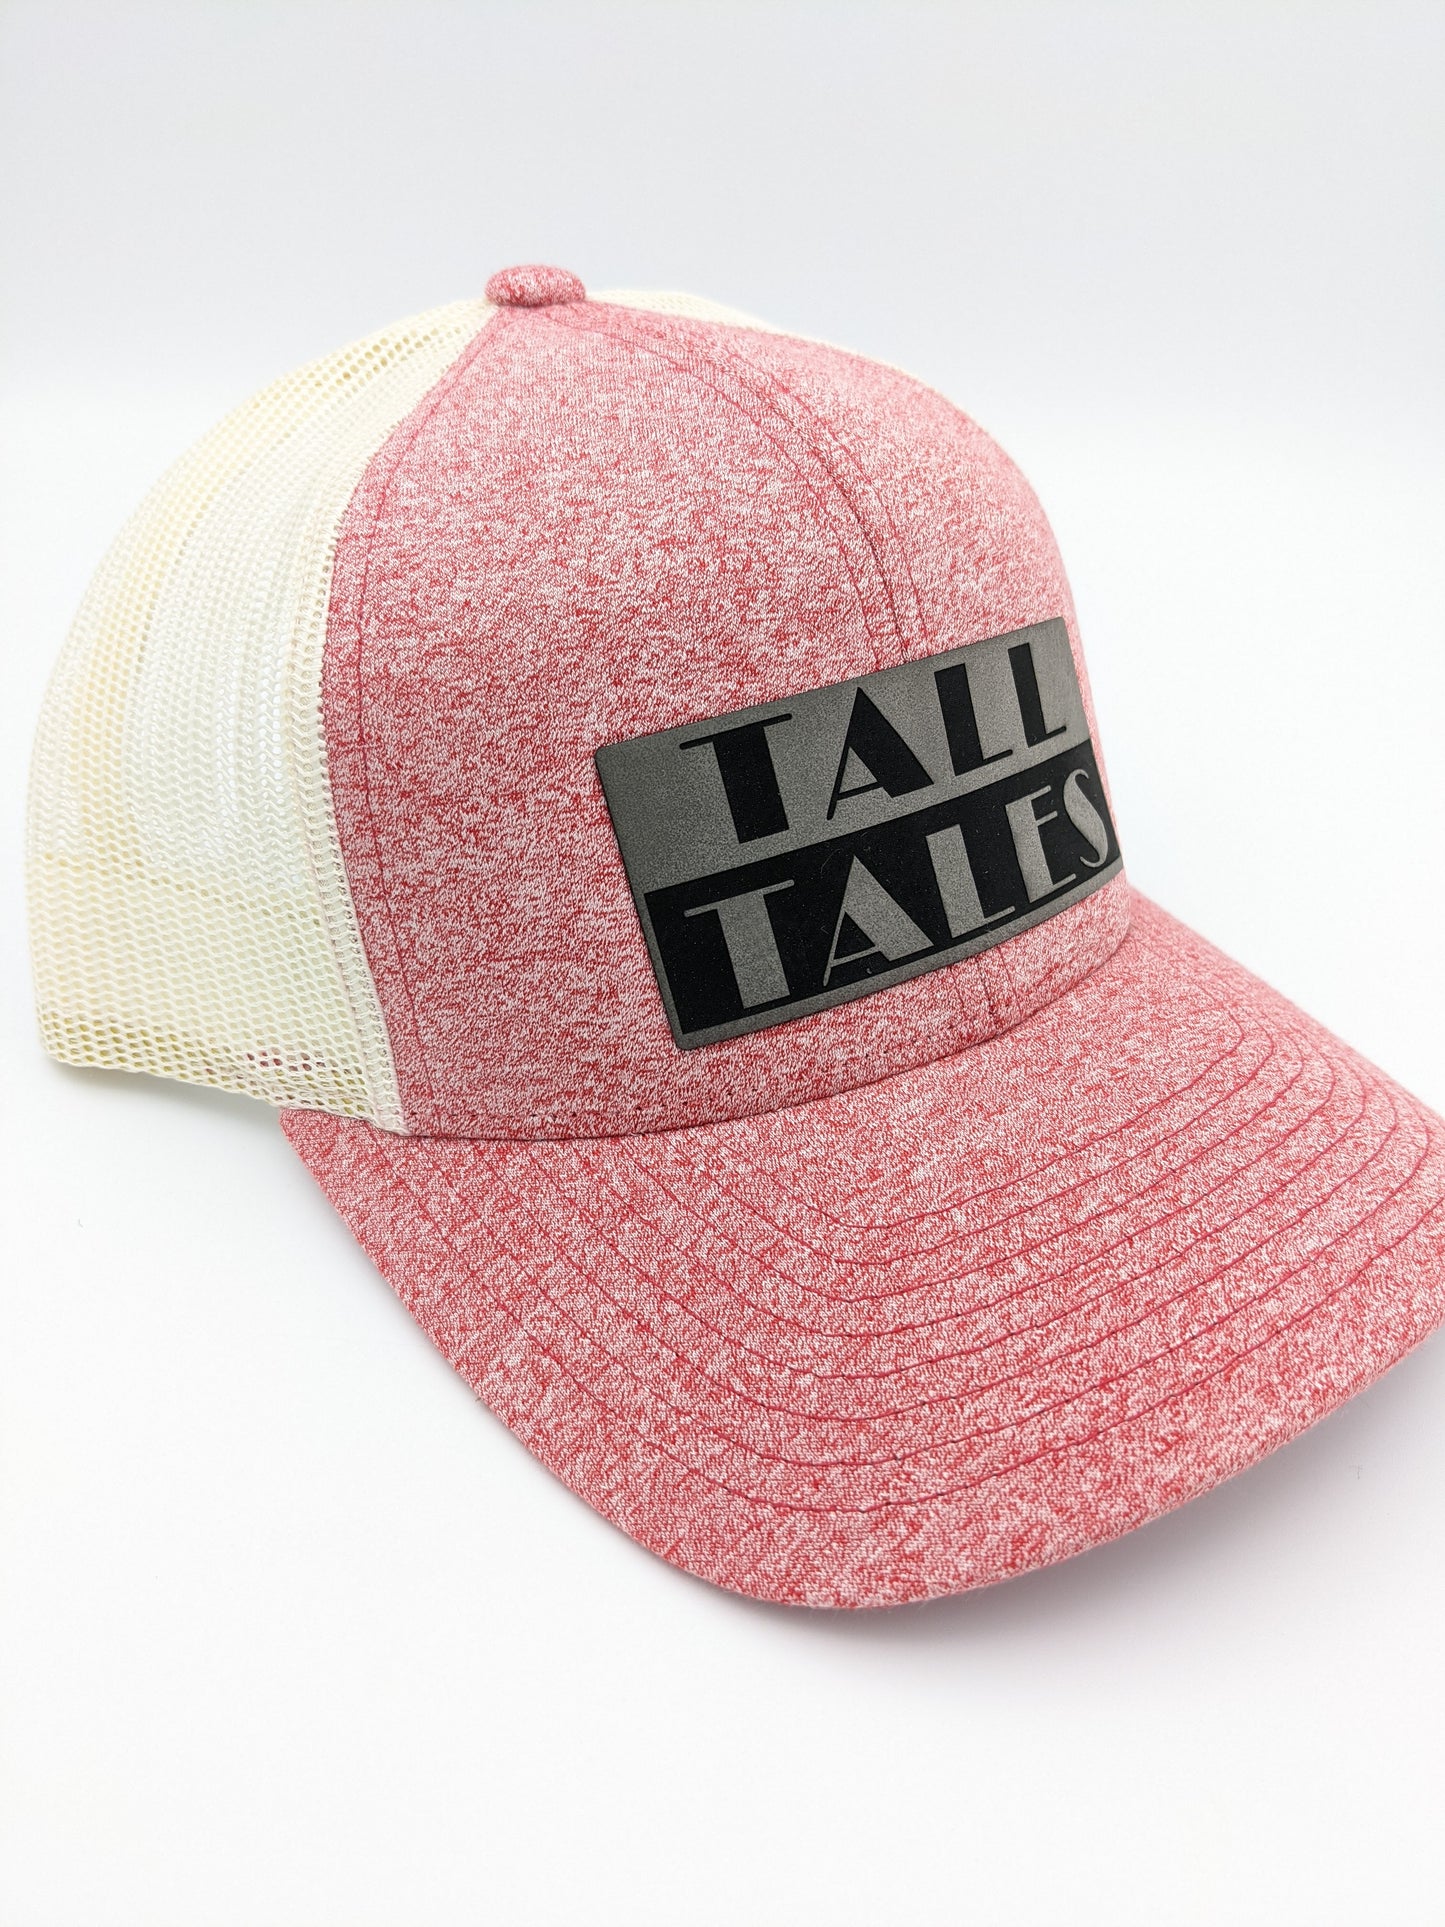 Tall Tales Hat Leather Patch